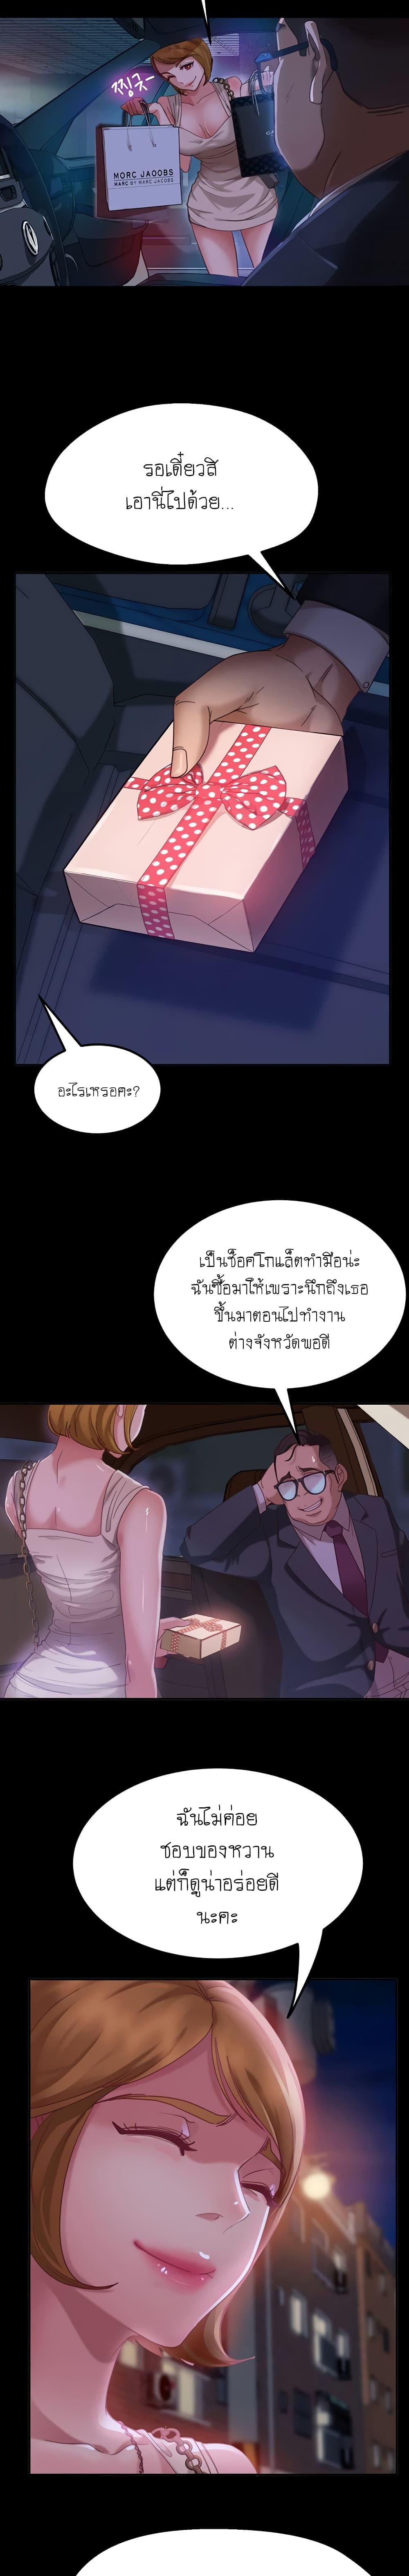 A Twisted Day 3 ภาพ 11